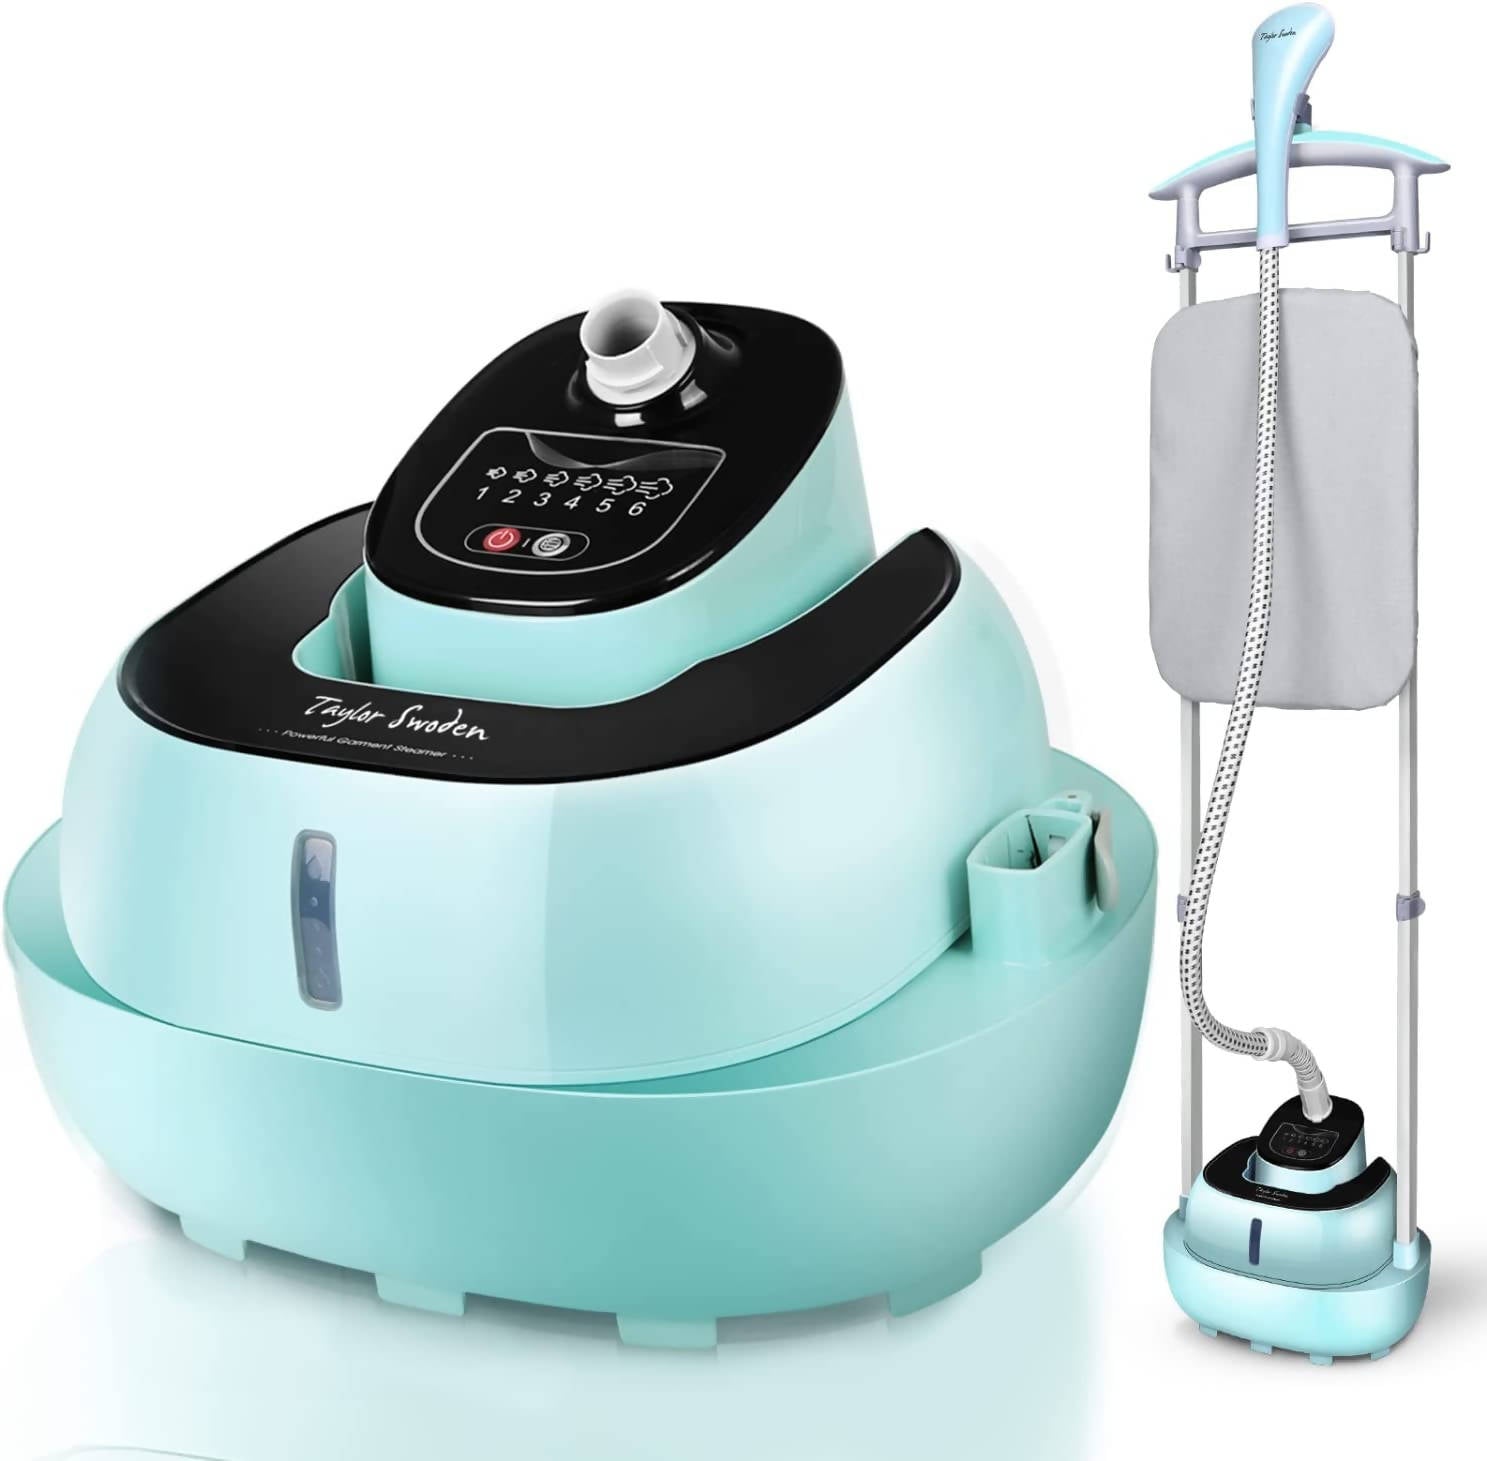 Taylor Swoden Mint Steamer Steamer 2000 W Steam Smoother with Integrated 2 L Large Tank, Steamer for Clothes with Fabrics, Ironing Board and Retractable Pole